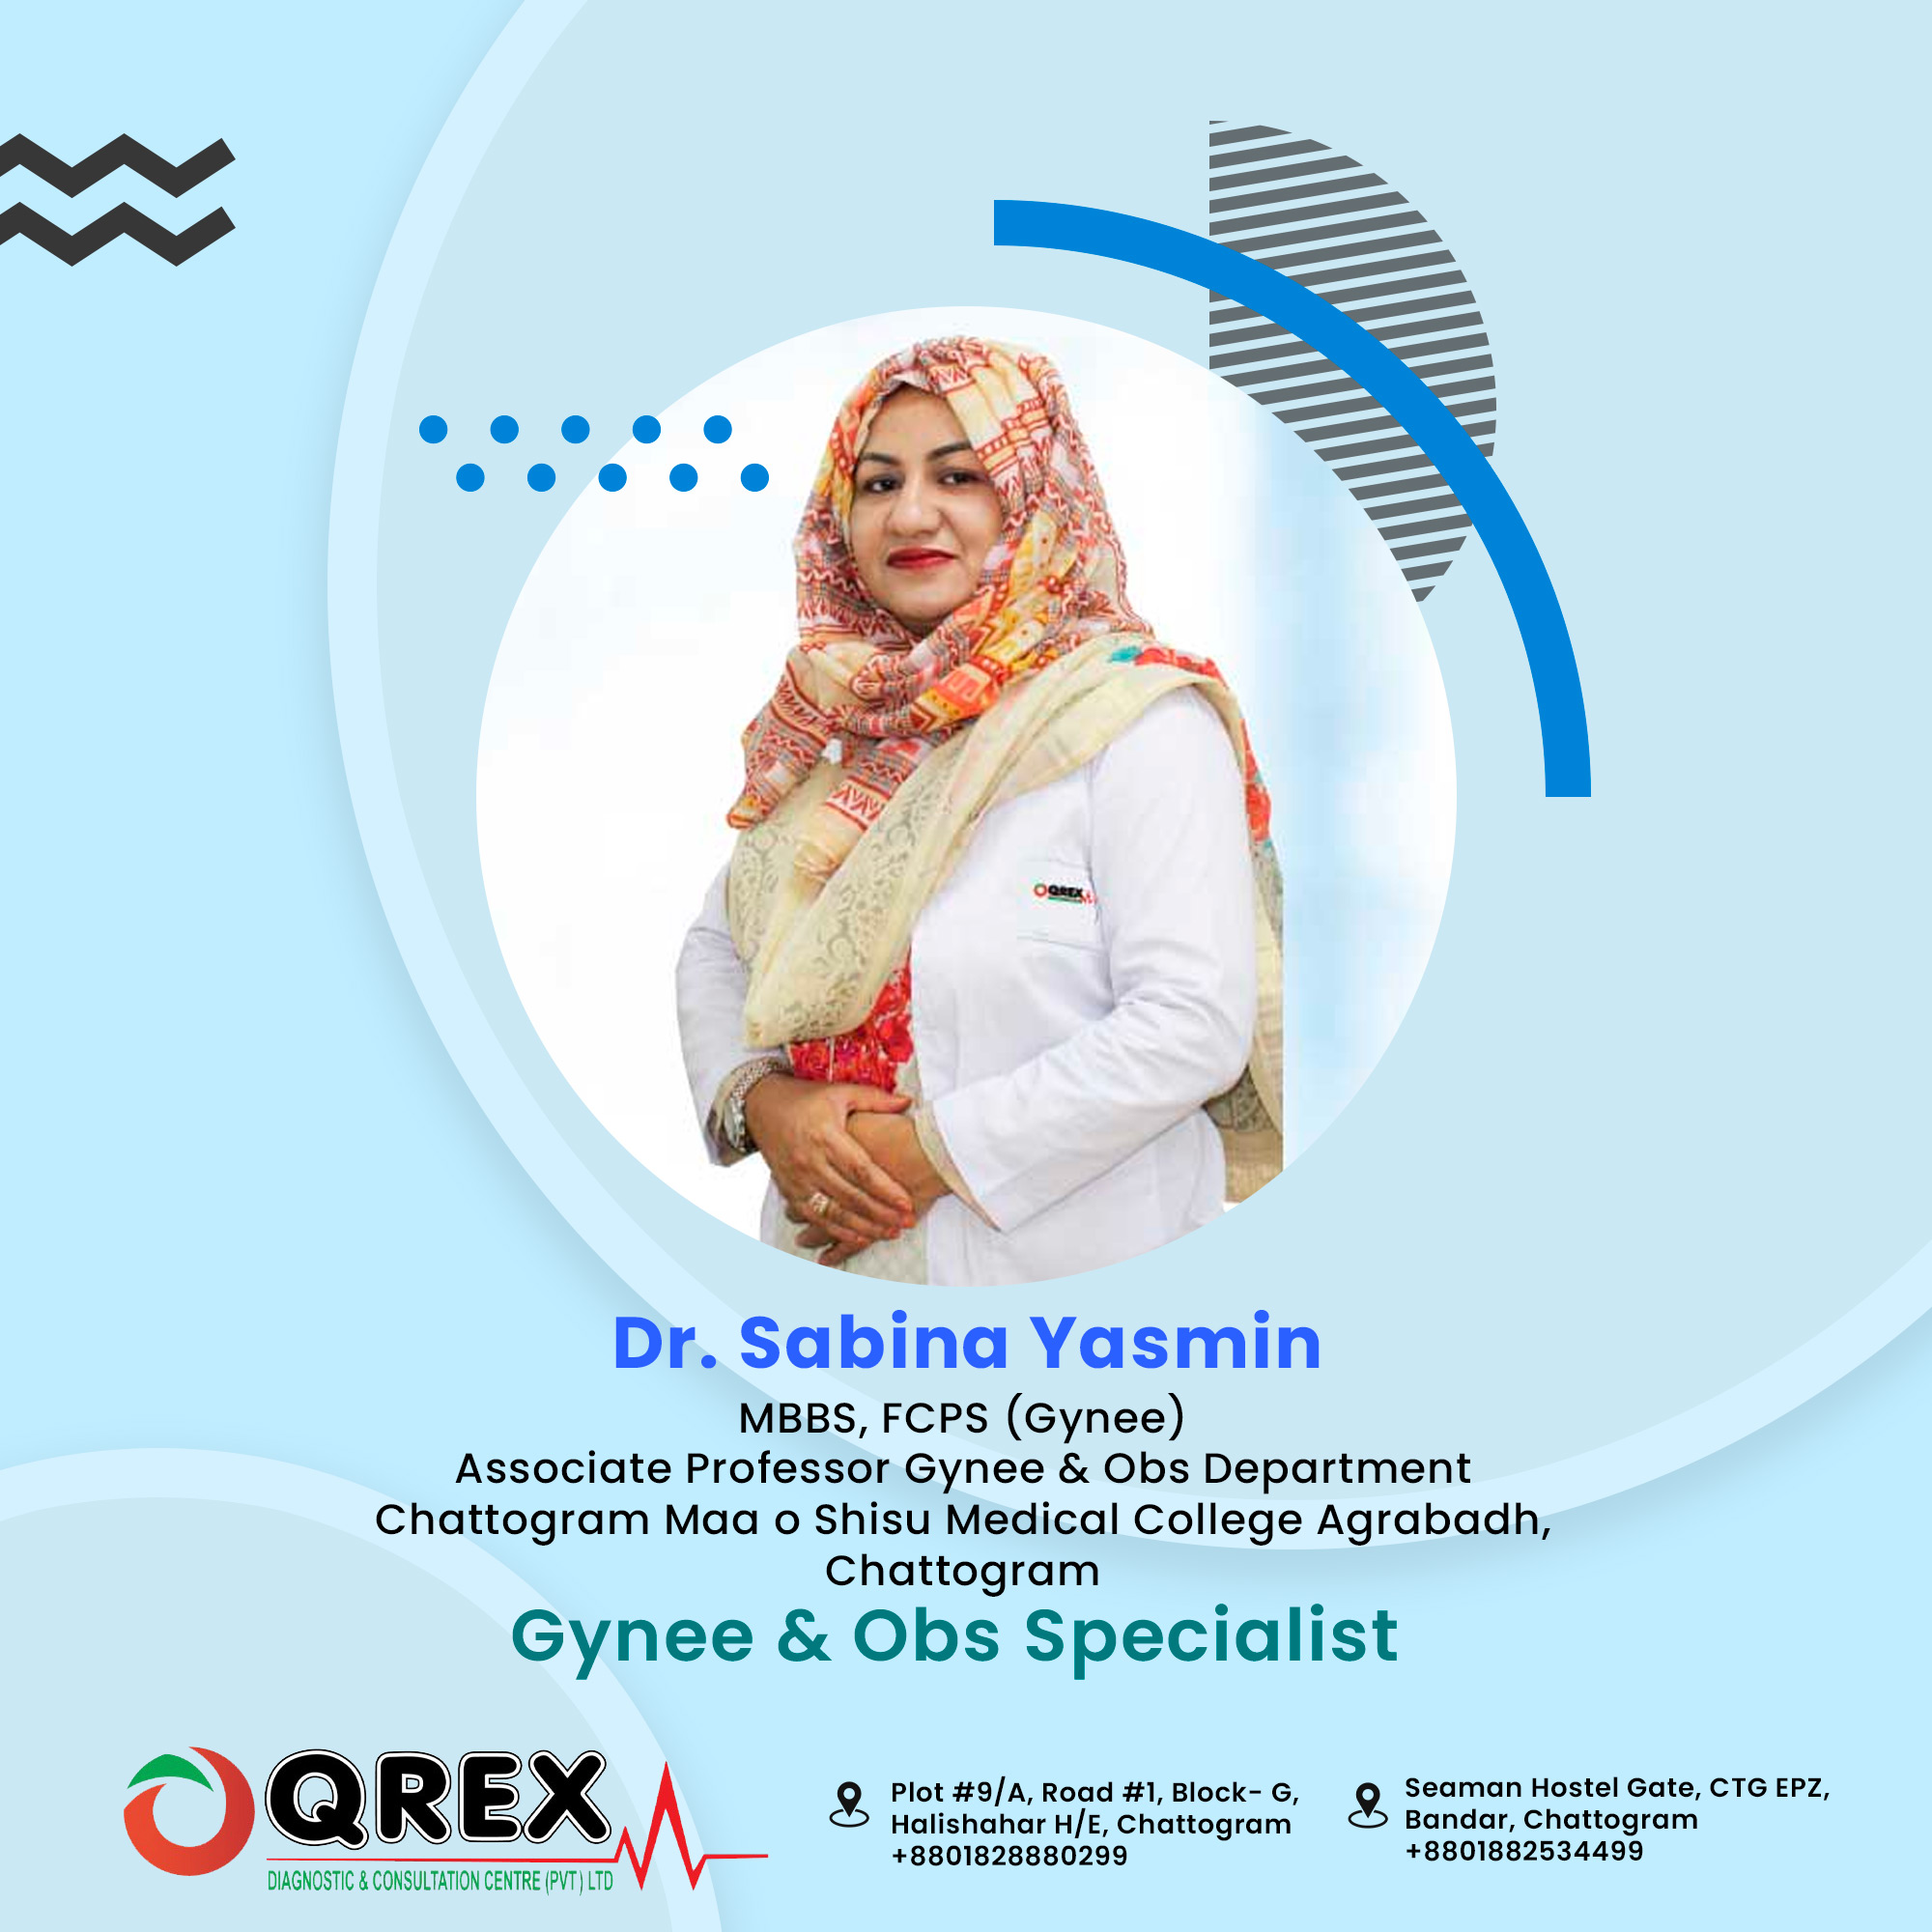 Dr. Sabina Yasmin specializes in gynecology and obstetrics